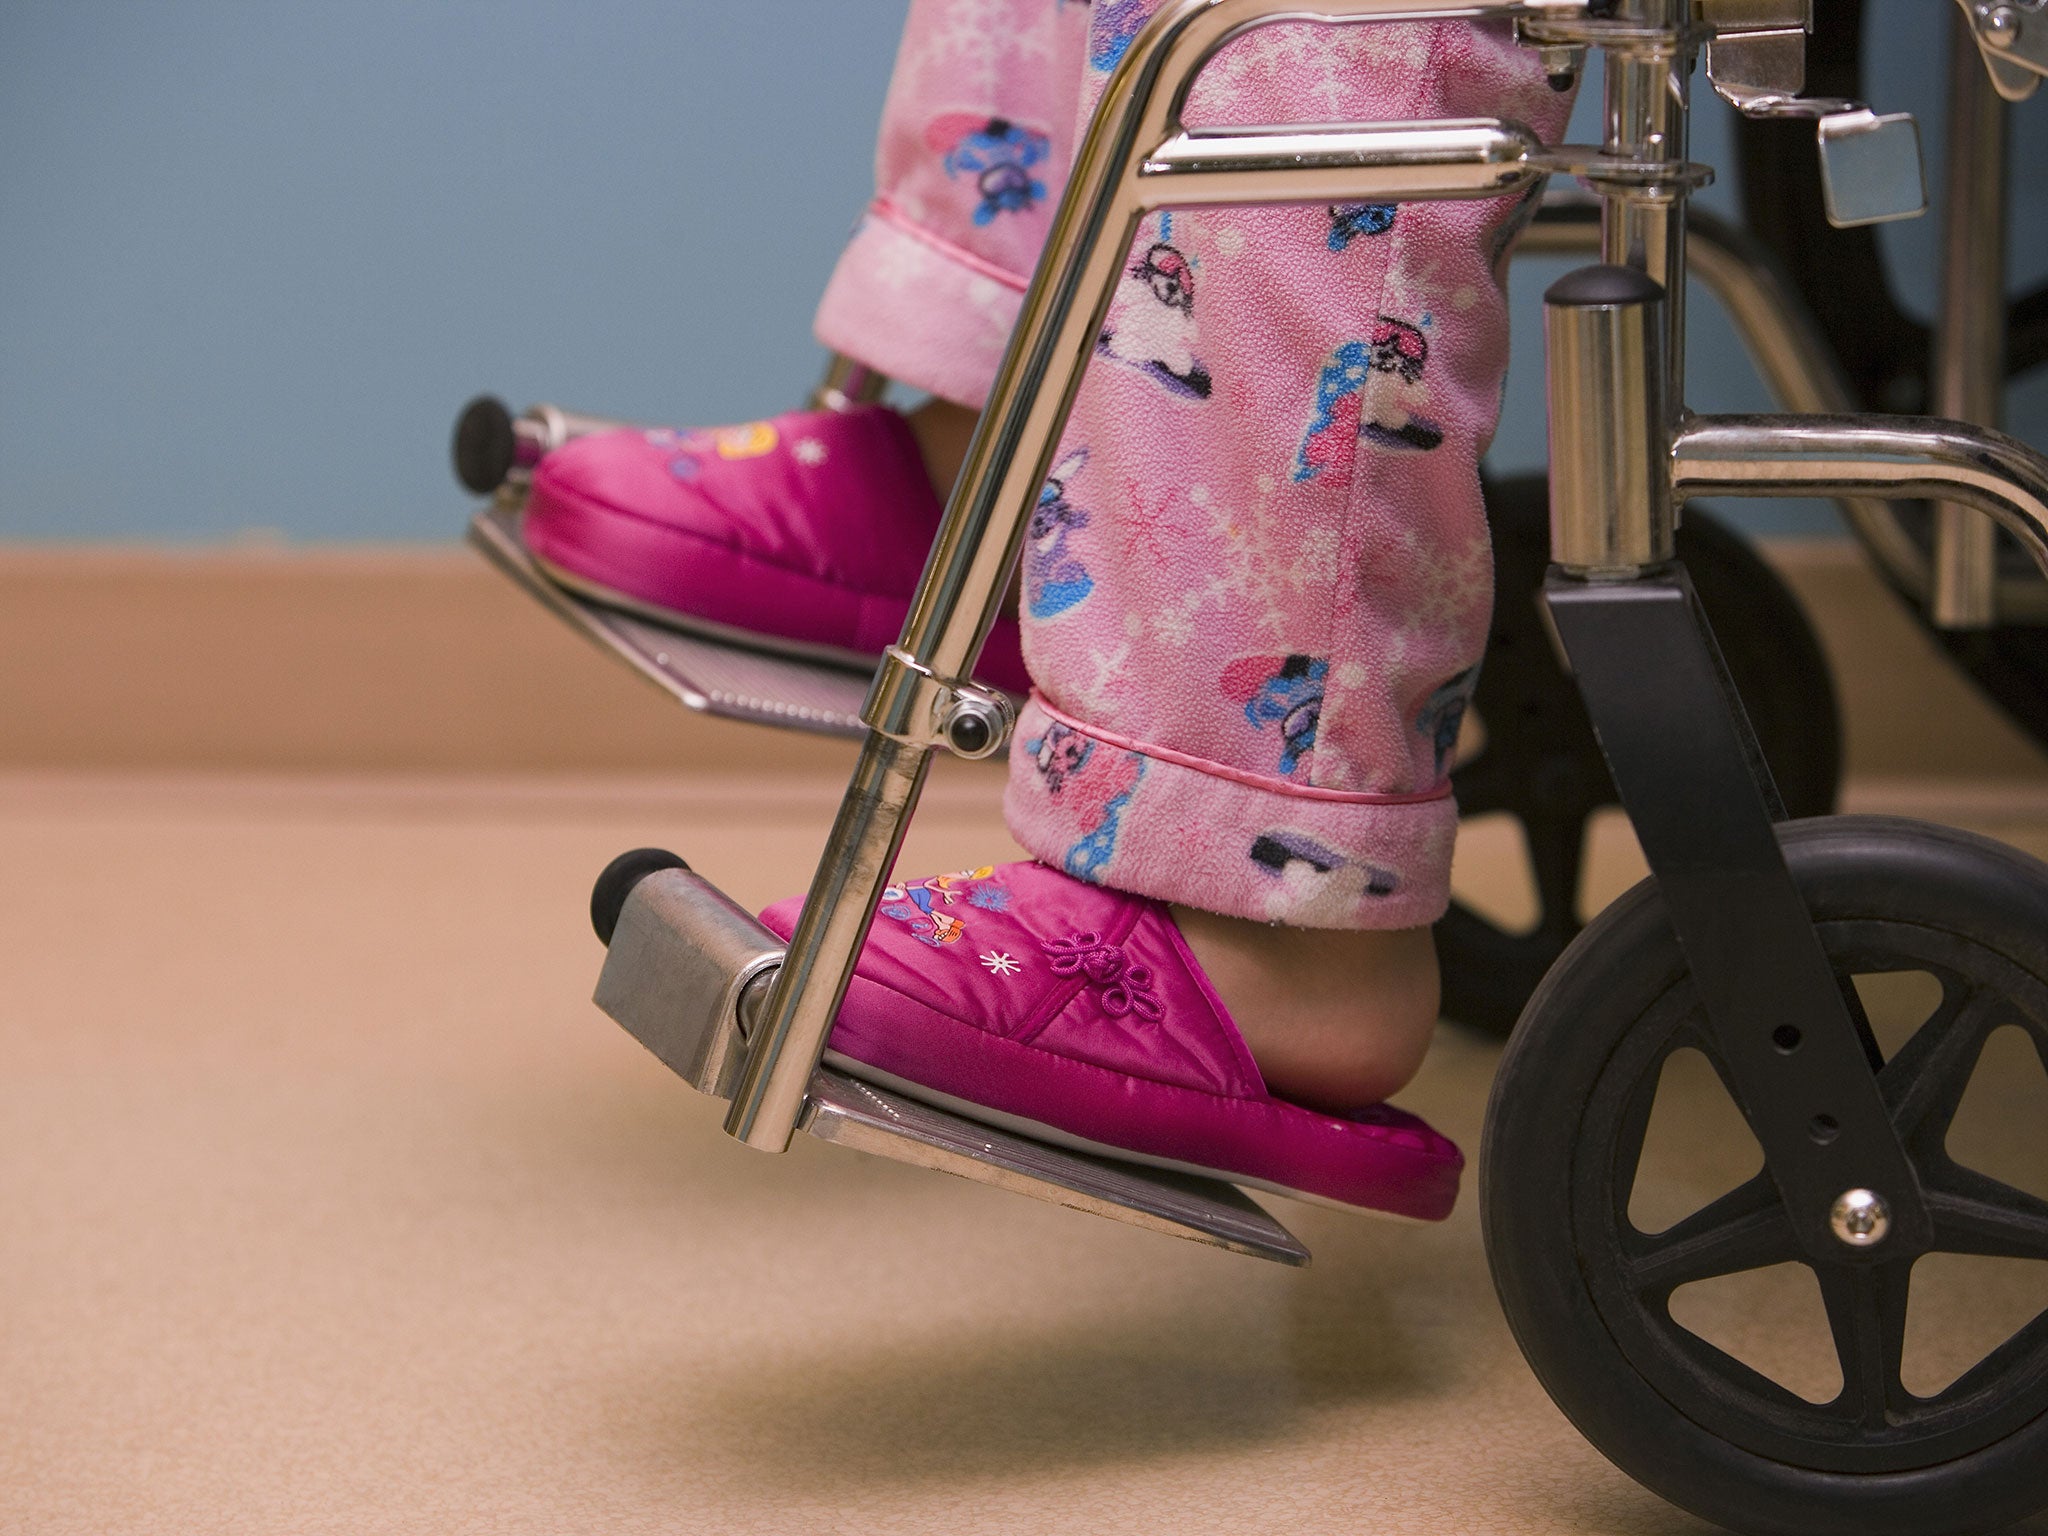 Some disabled people require specially adapted equipment to help them live independent lives